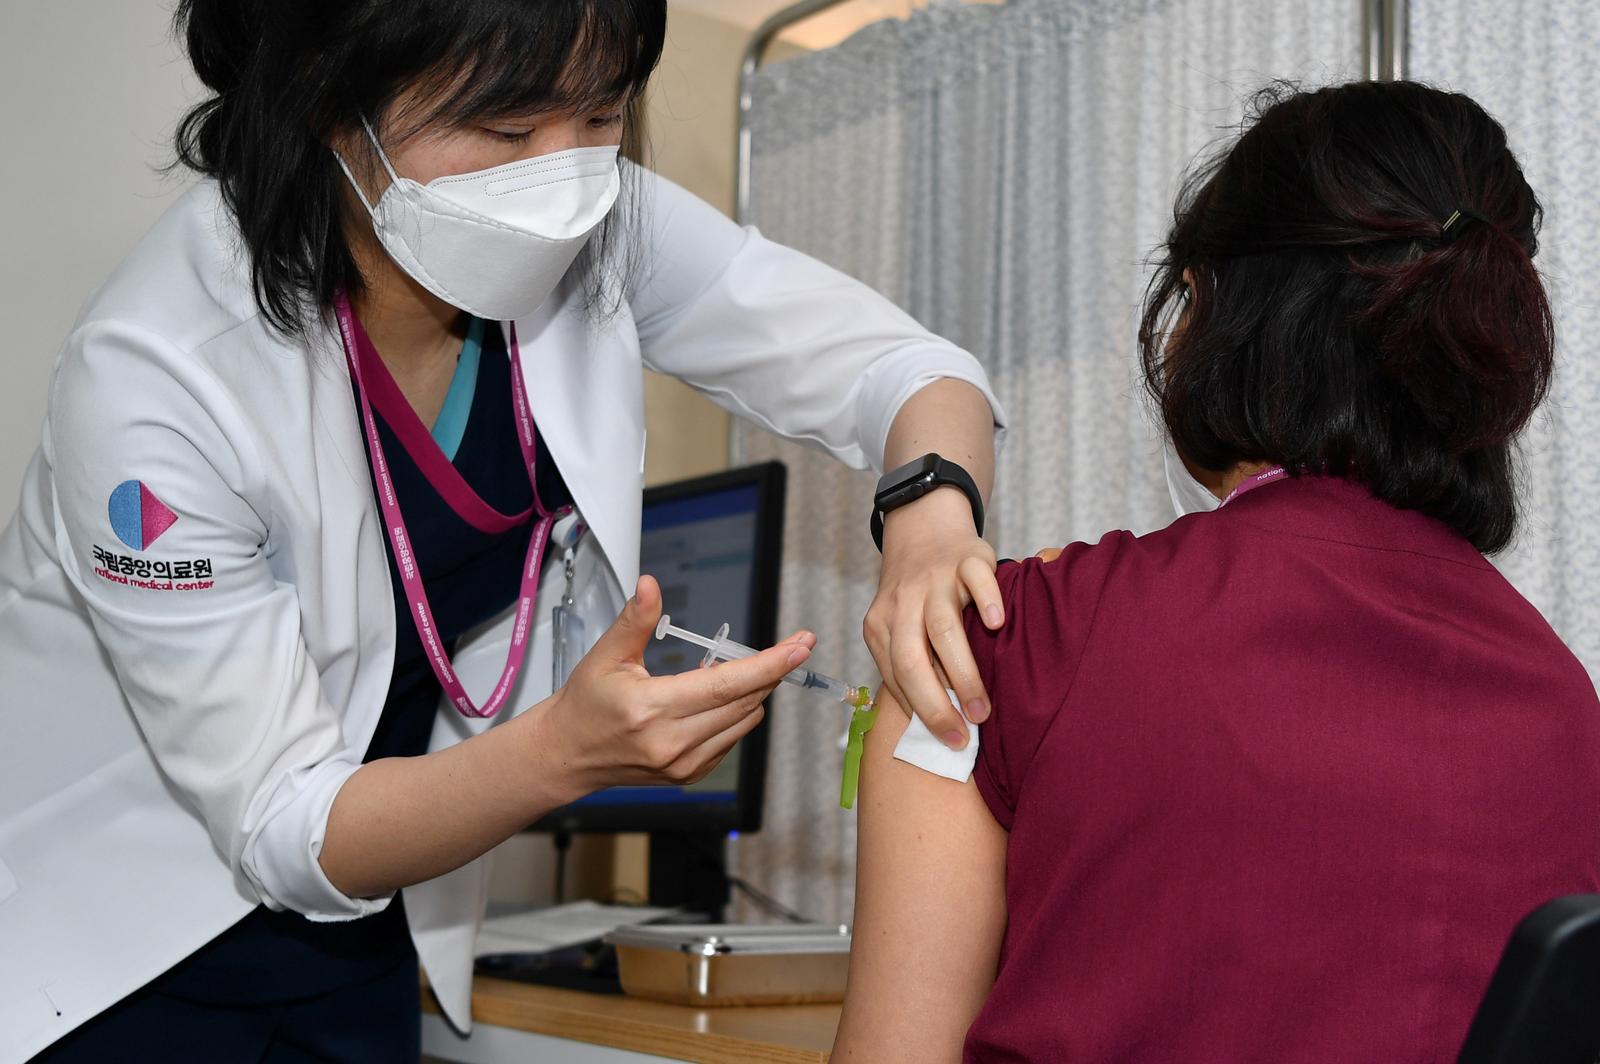 South Korea says up to medical personnel to extract extra doses of COVID vaccine from vial